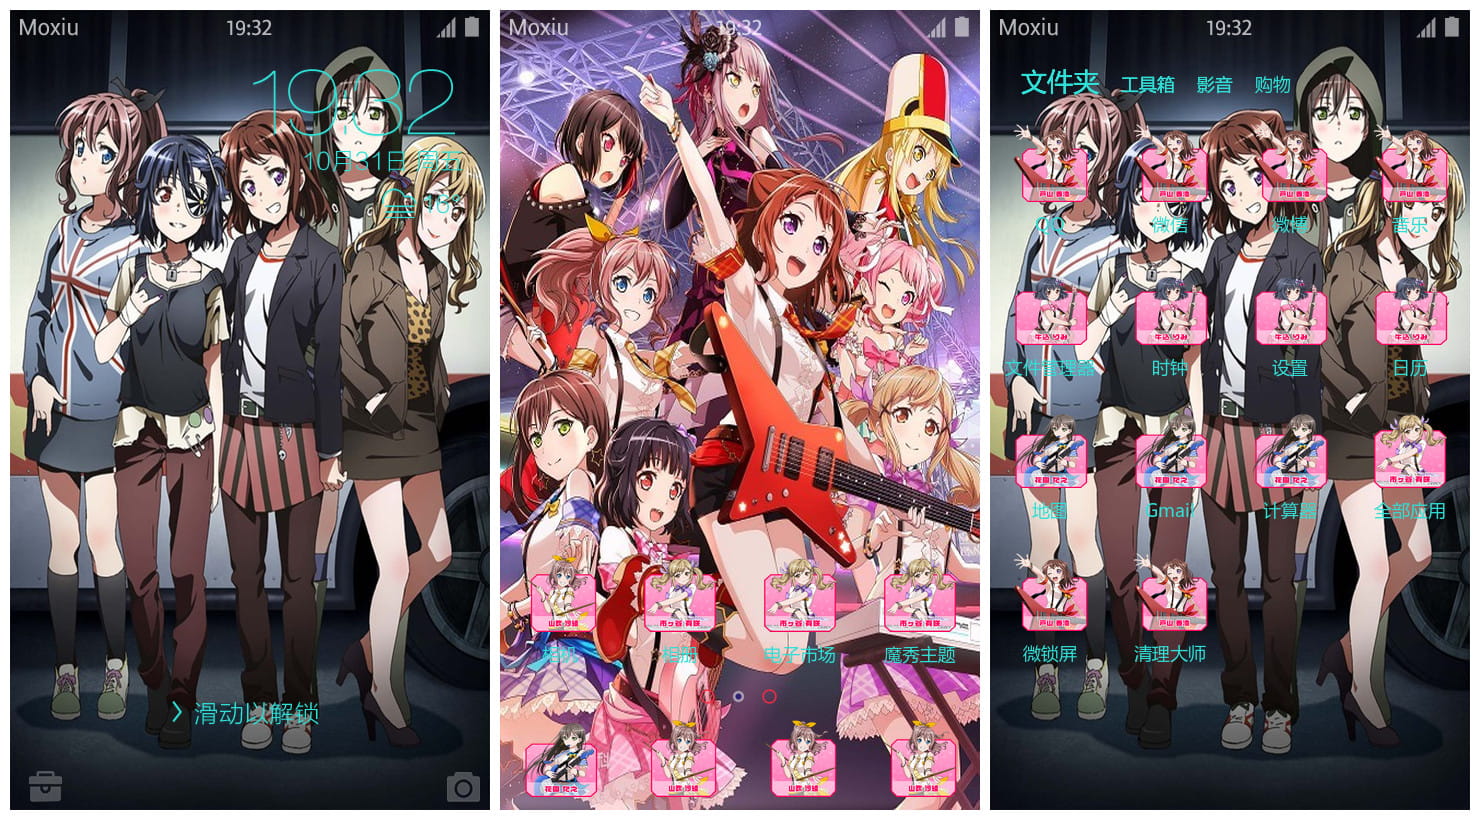 Poppin Party,BangDream,动漫手机主题